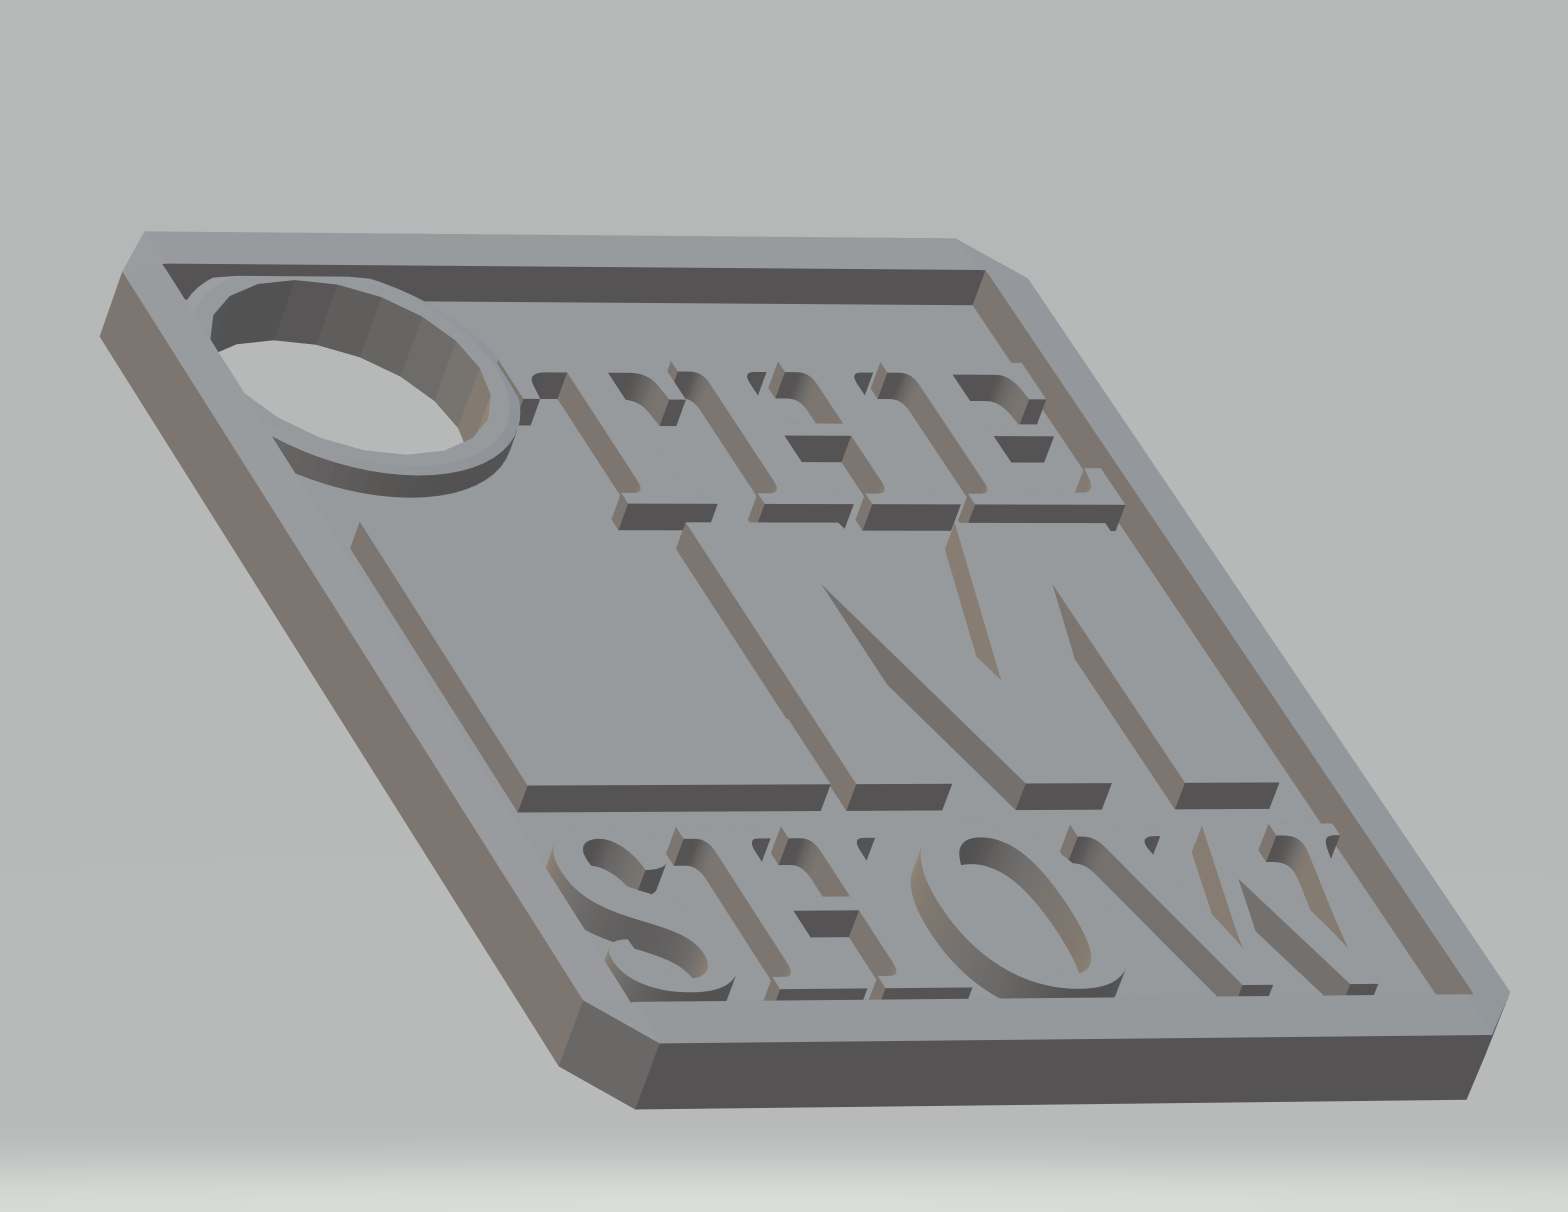 FHW: The LM Show Key fob